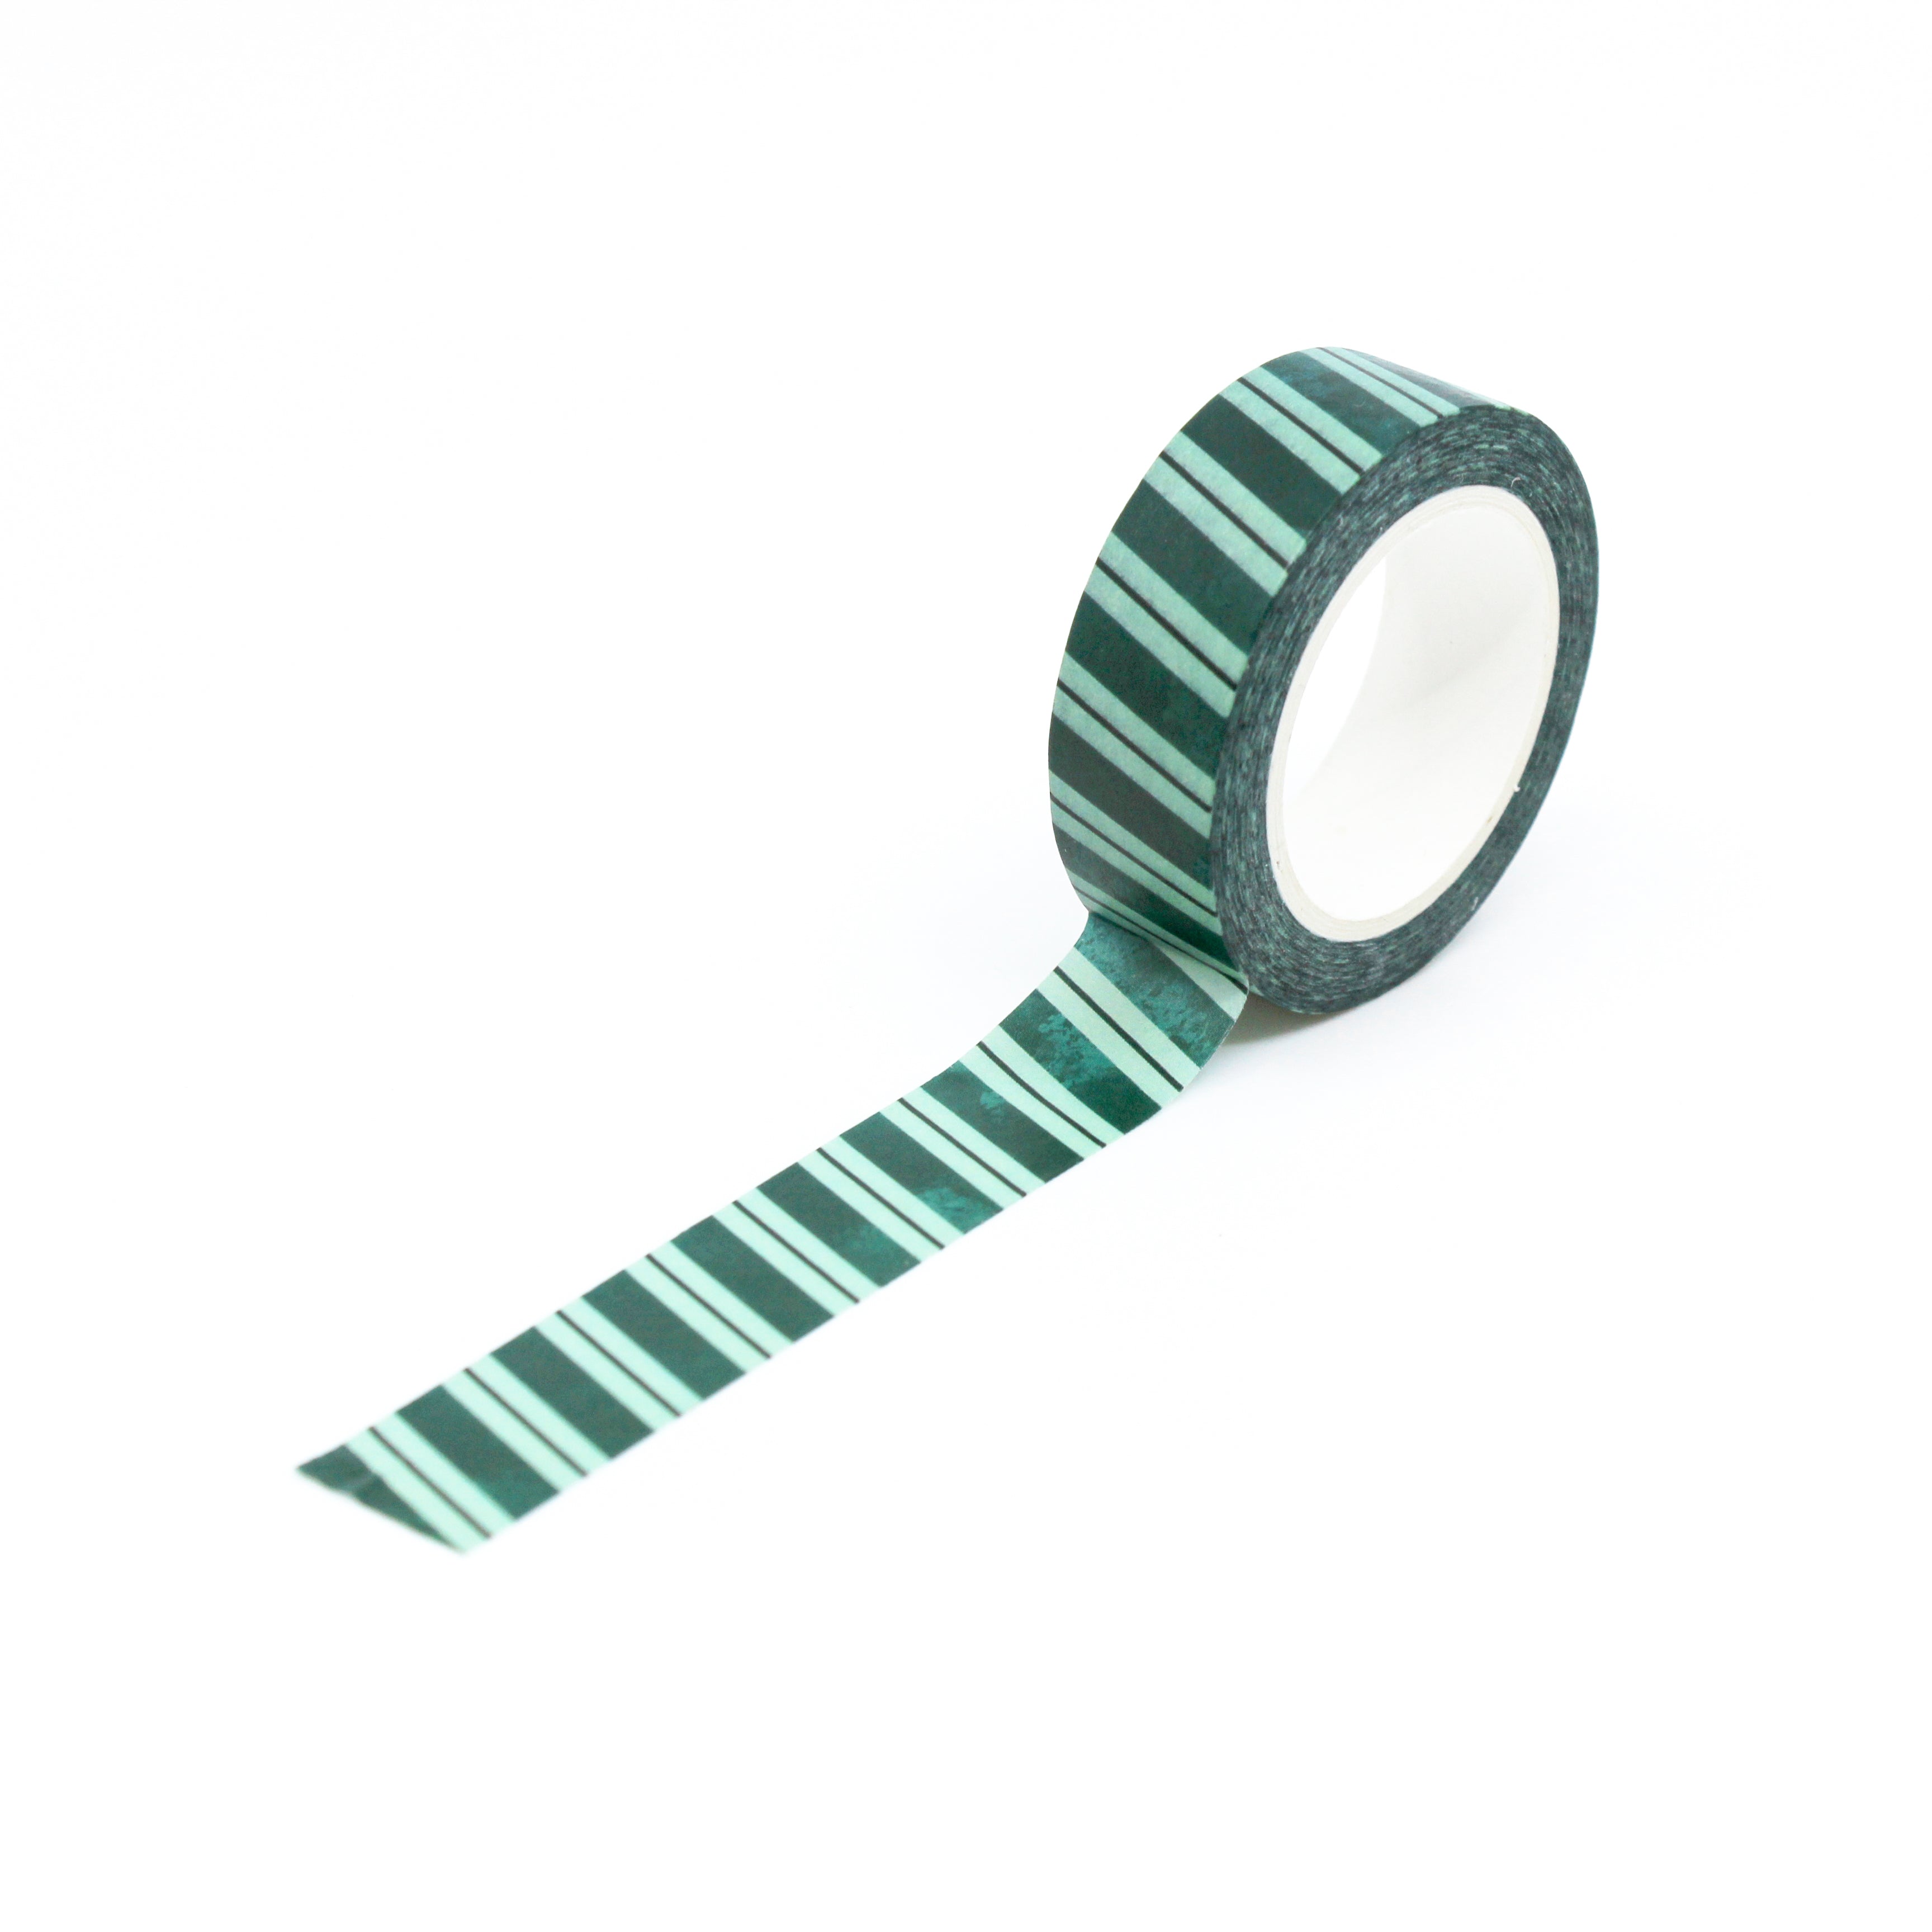 This is a full pattern repeat view of green and white stripe washi tape from BBB Supplies Craft Shop